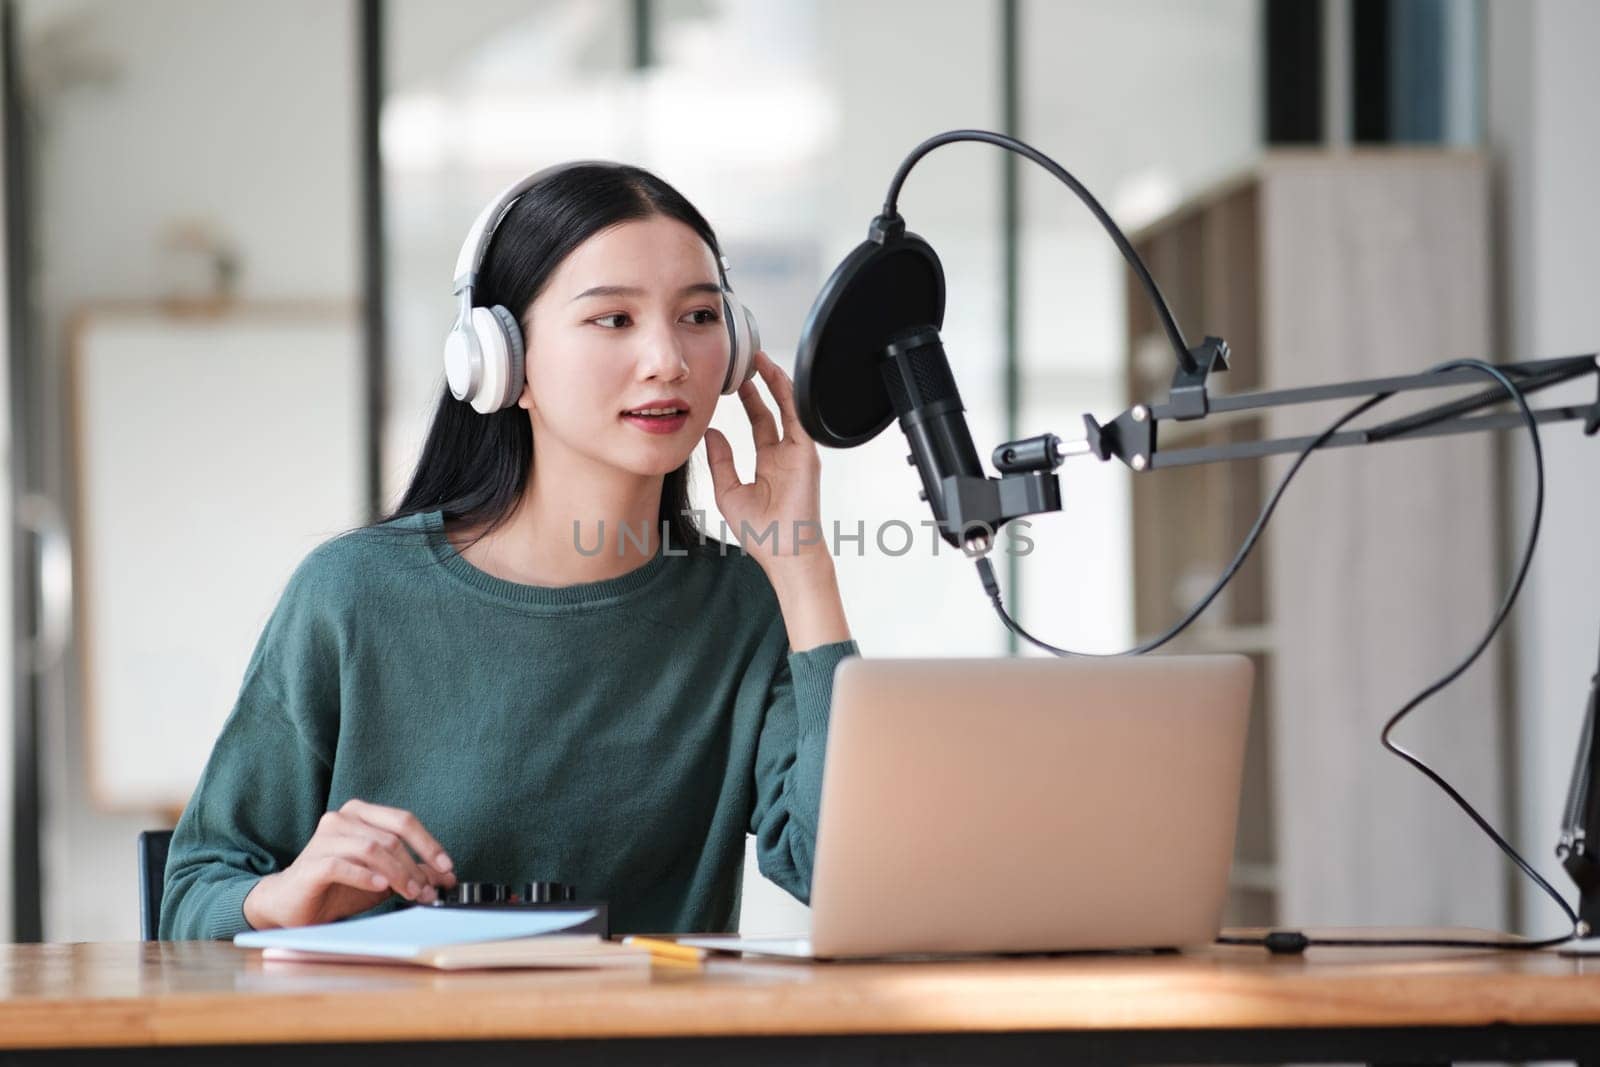 A woman wearing headphones is sitting at a desk with a laptop and a microphone by ijeab